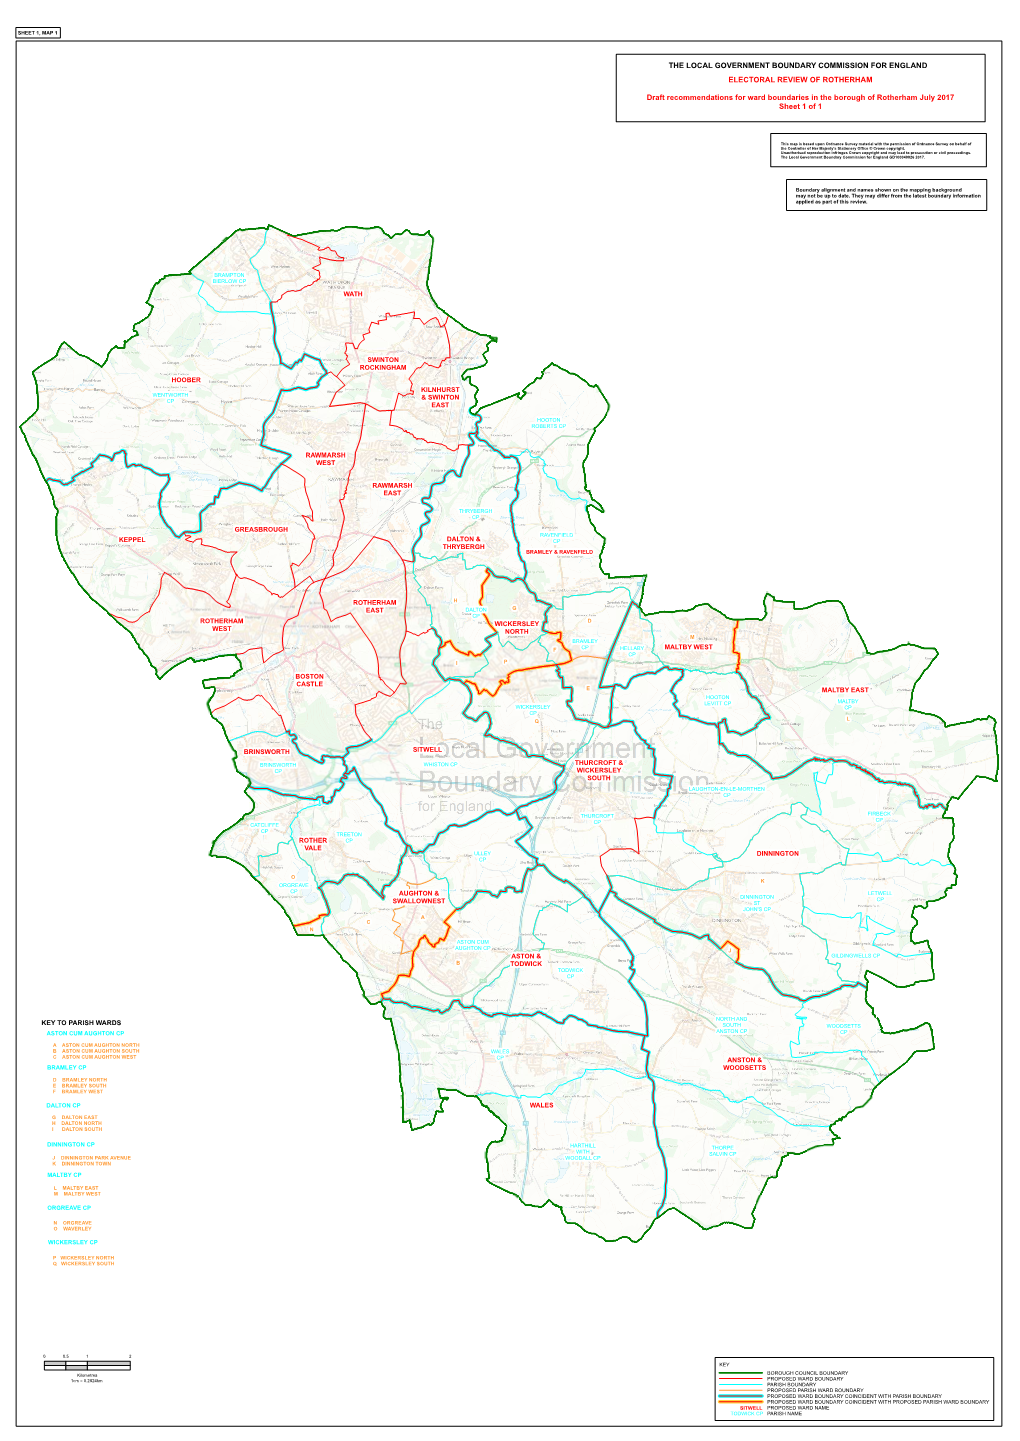 The Local Government Boundary Commission for England Electoral Review of Rotherham